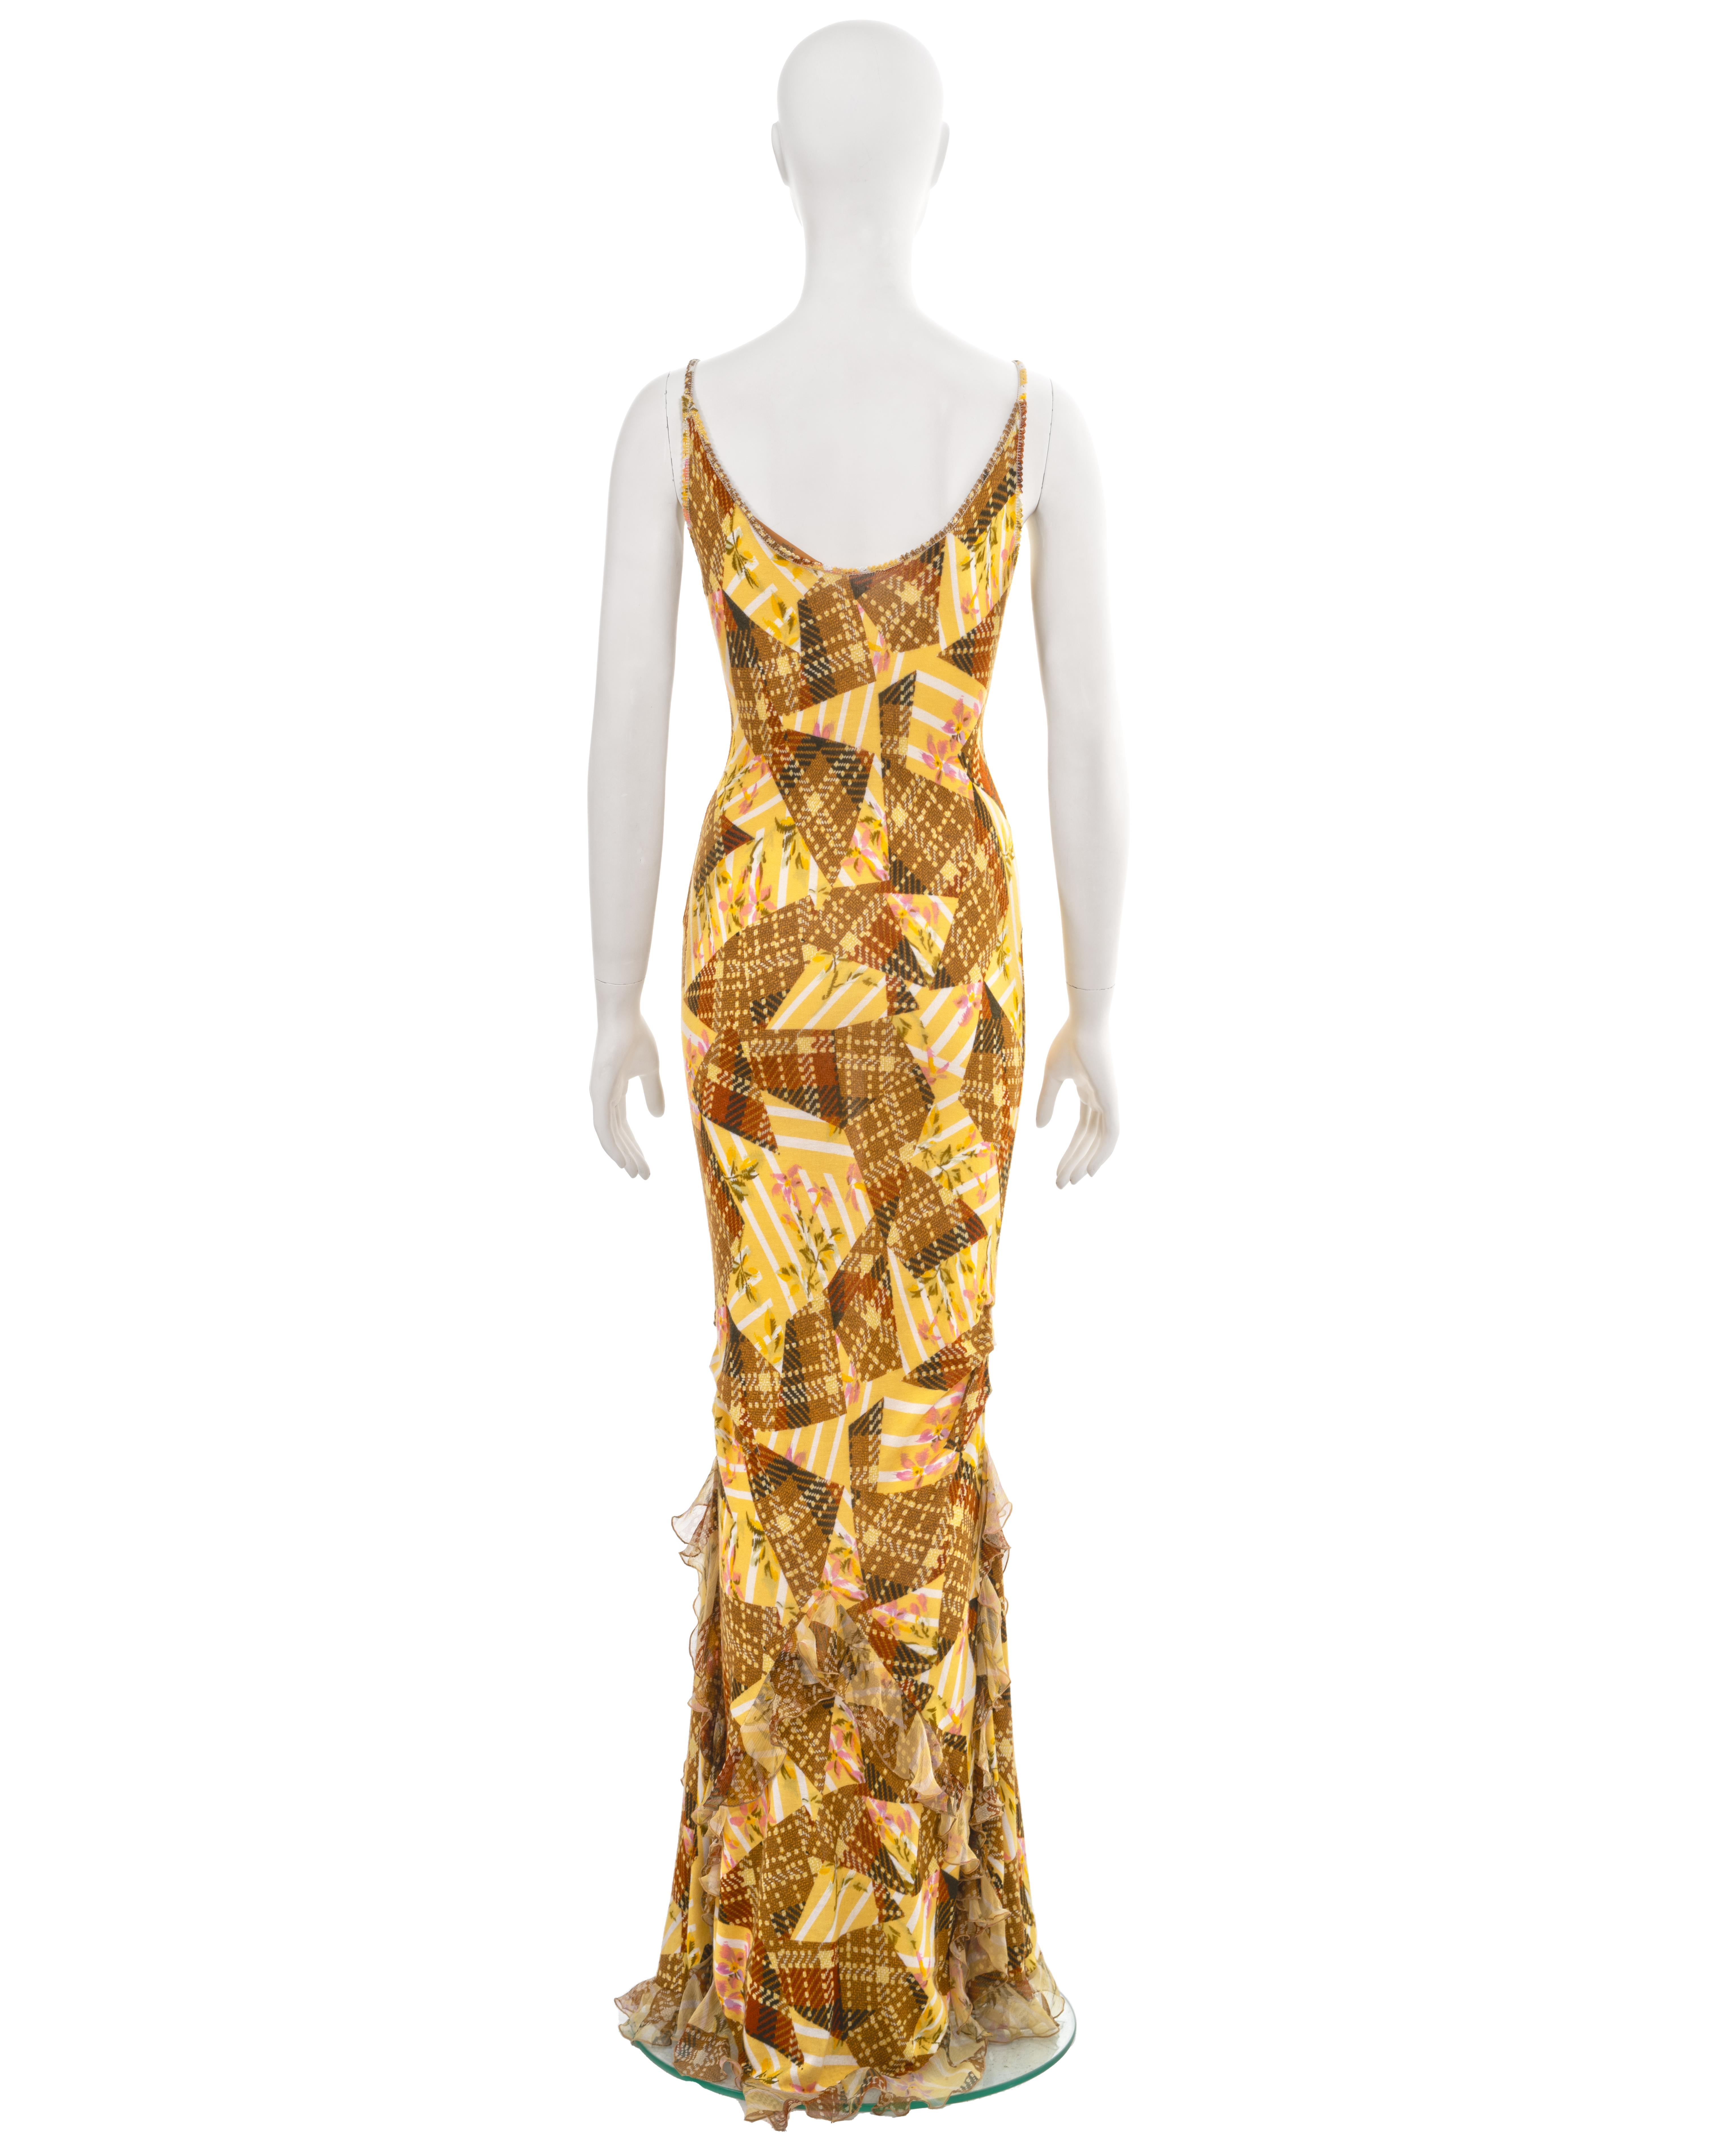 John Galliano knit jersey maxi dress with patchwork motif, fw 2004 For Sale 5